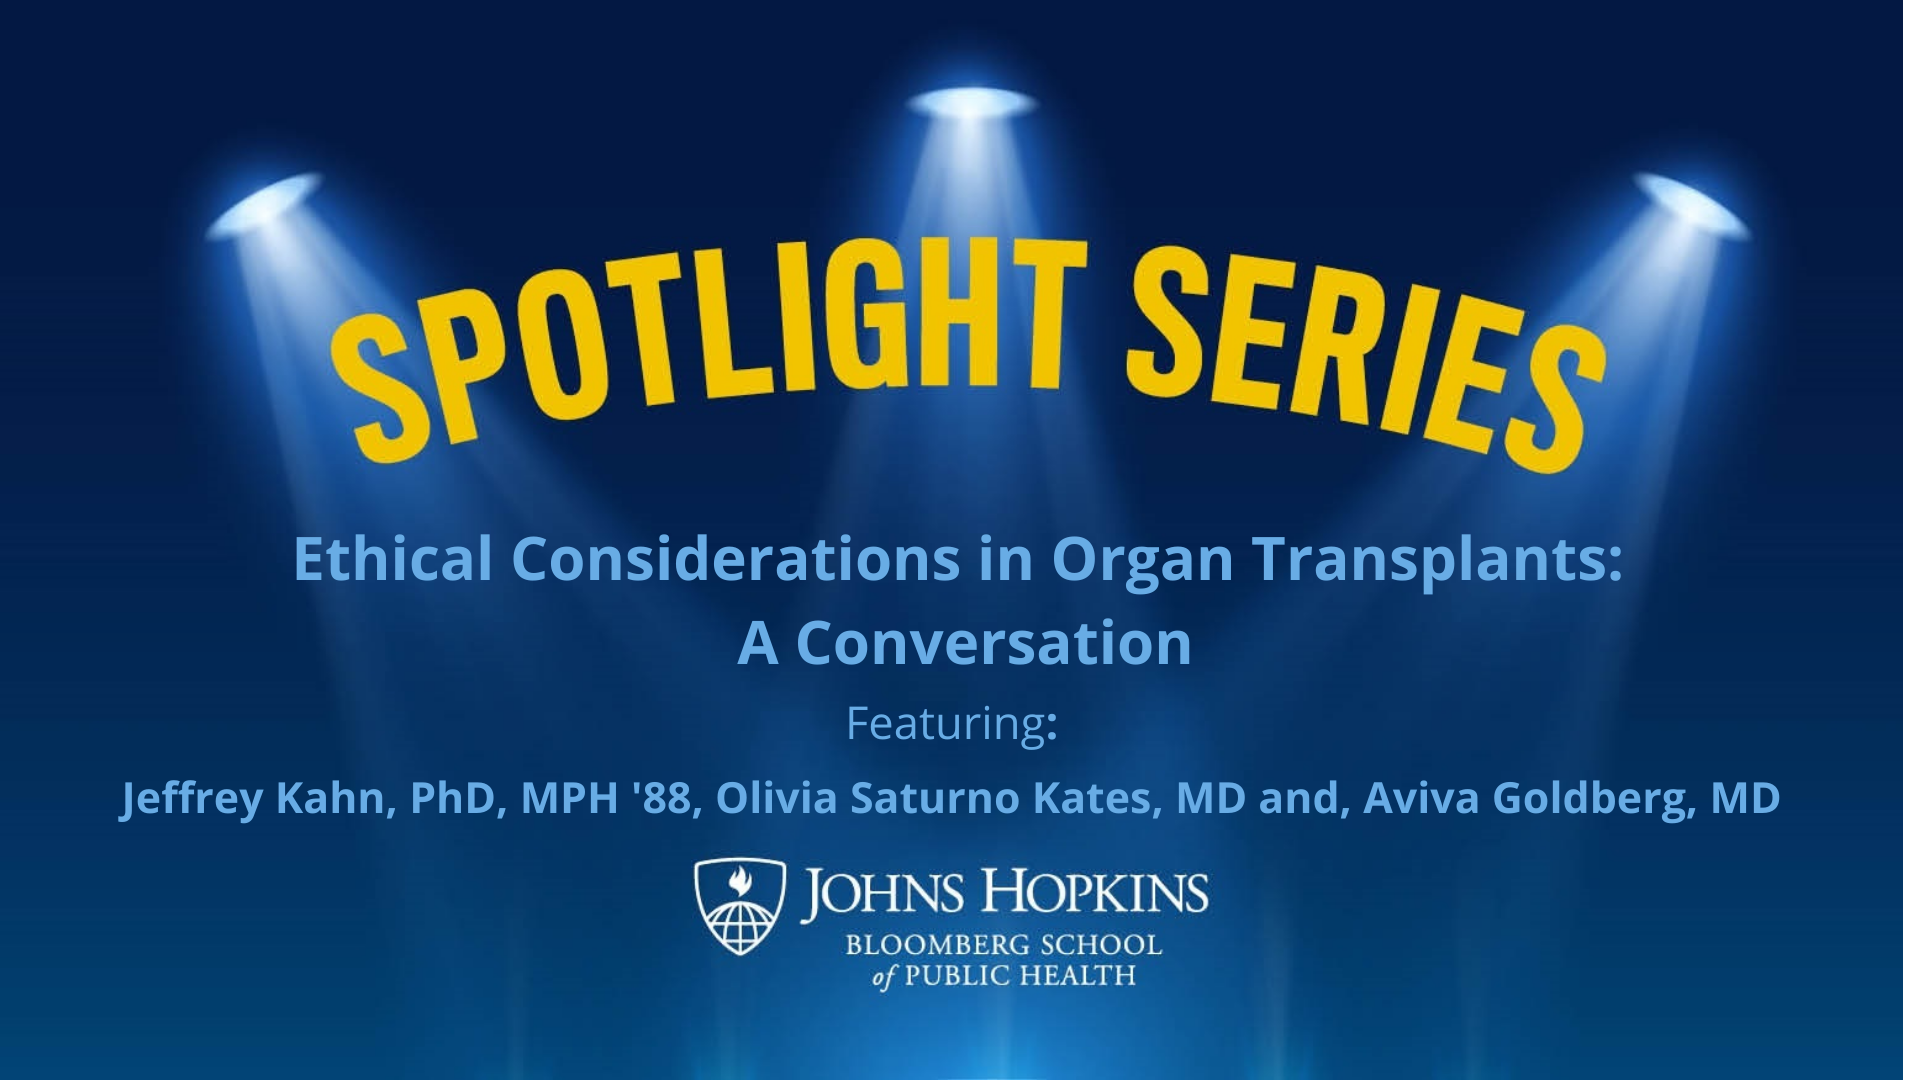 Ethical Considerations in Organ Transplants: A Conversation